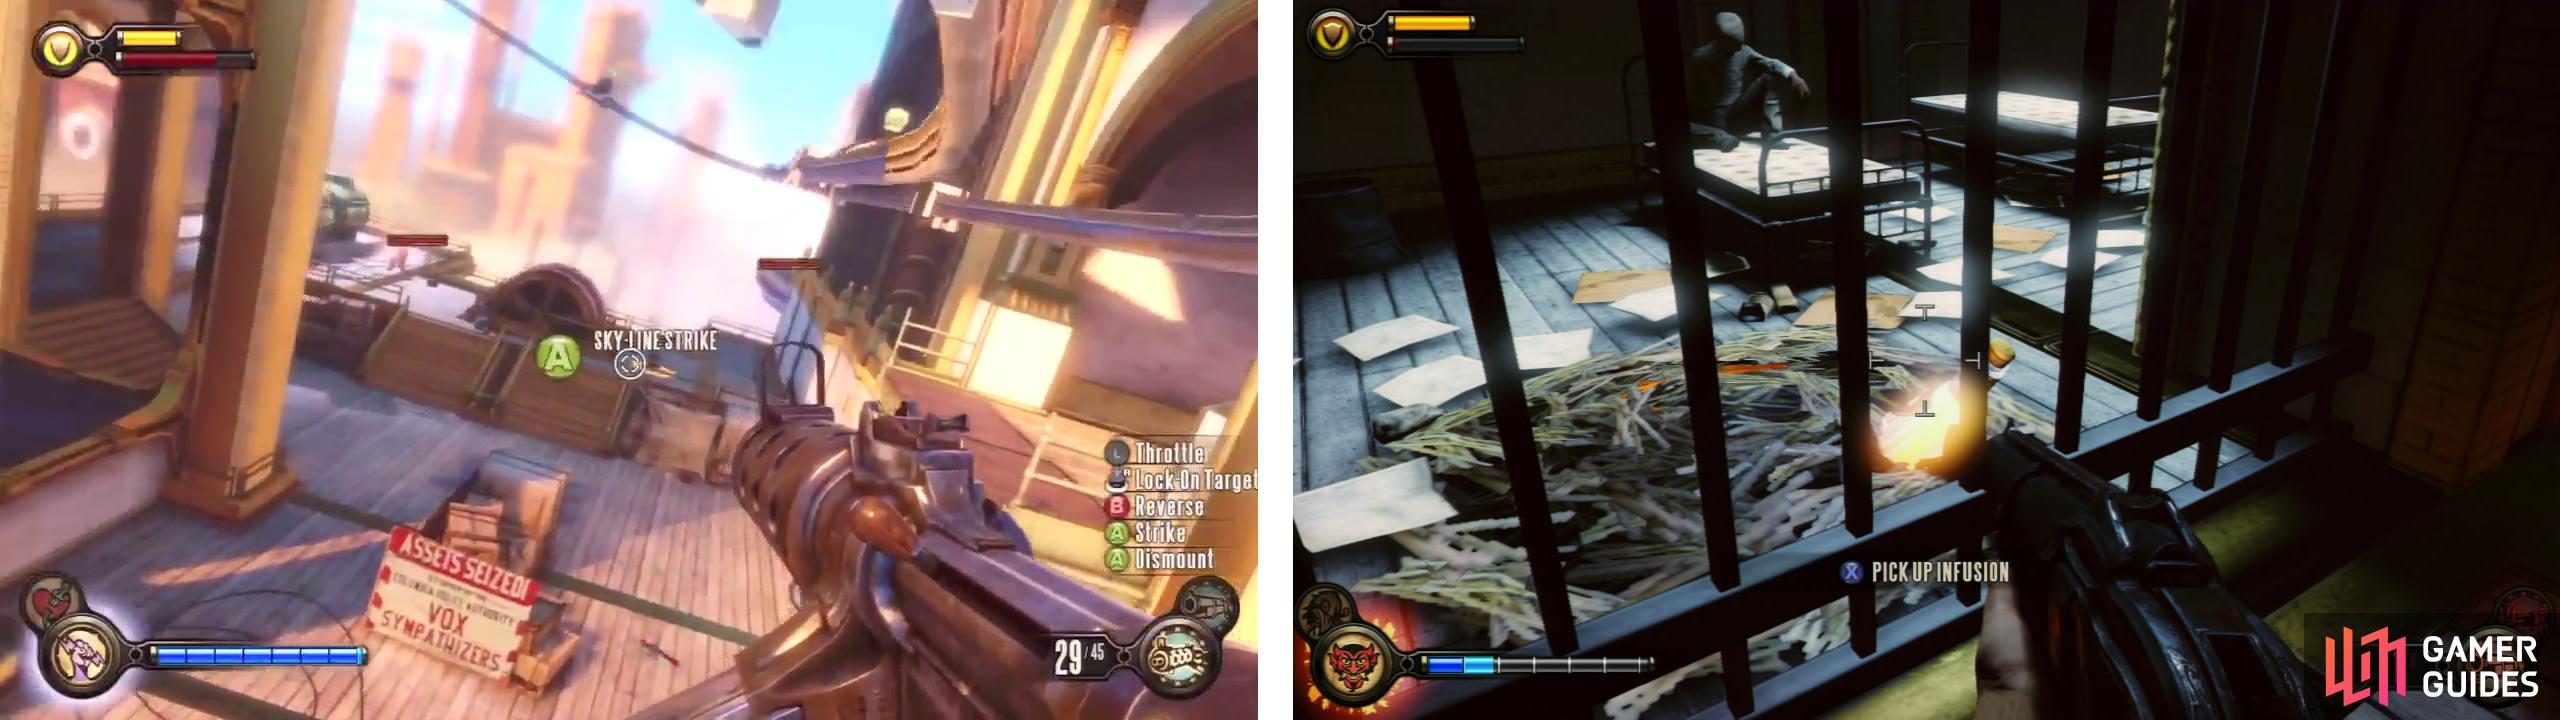 During the fight outside the police station (left), enter the ground floor of the building to find an Infusion Upgrade (right).